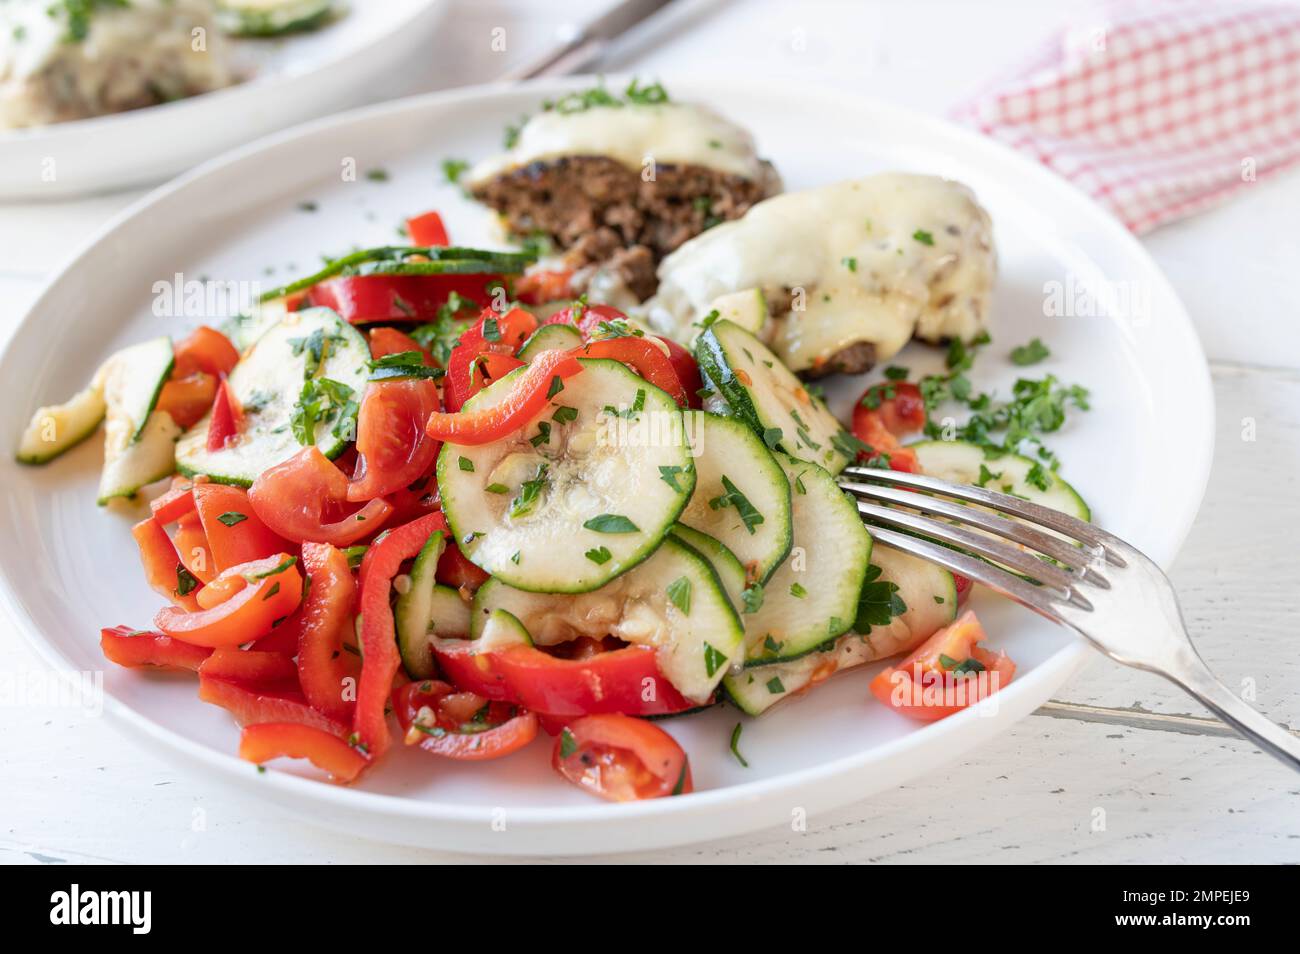 Zucchini salad with tomatoes and bell peppers marinated with olive oil, honey, vinegar and herbs Stock Photo